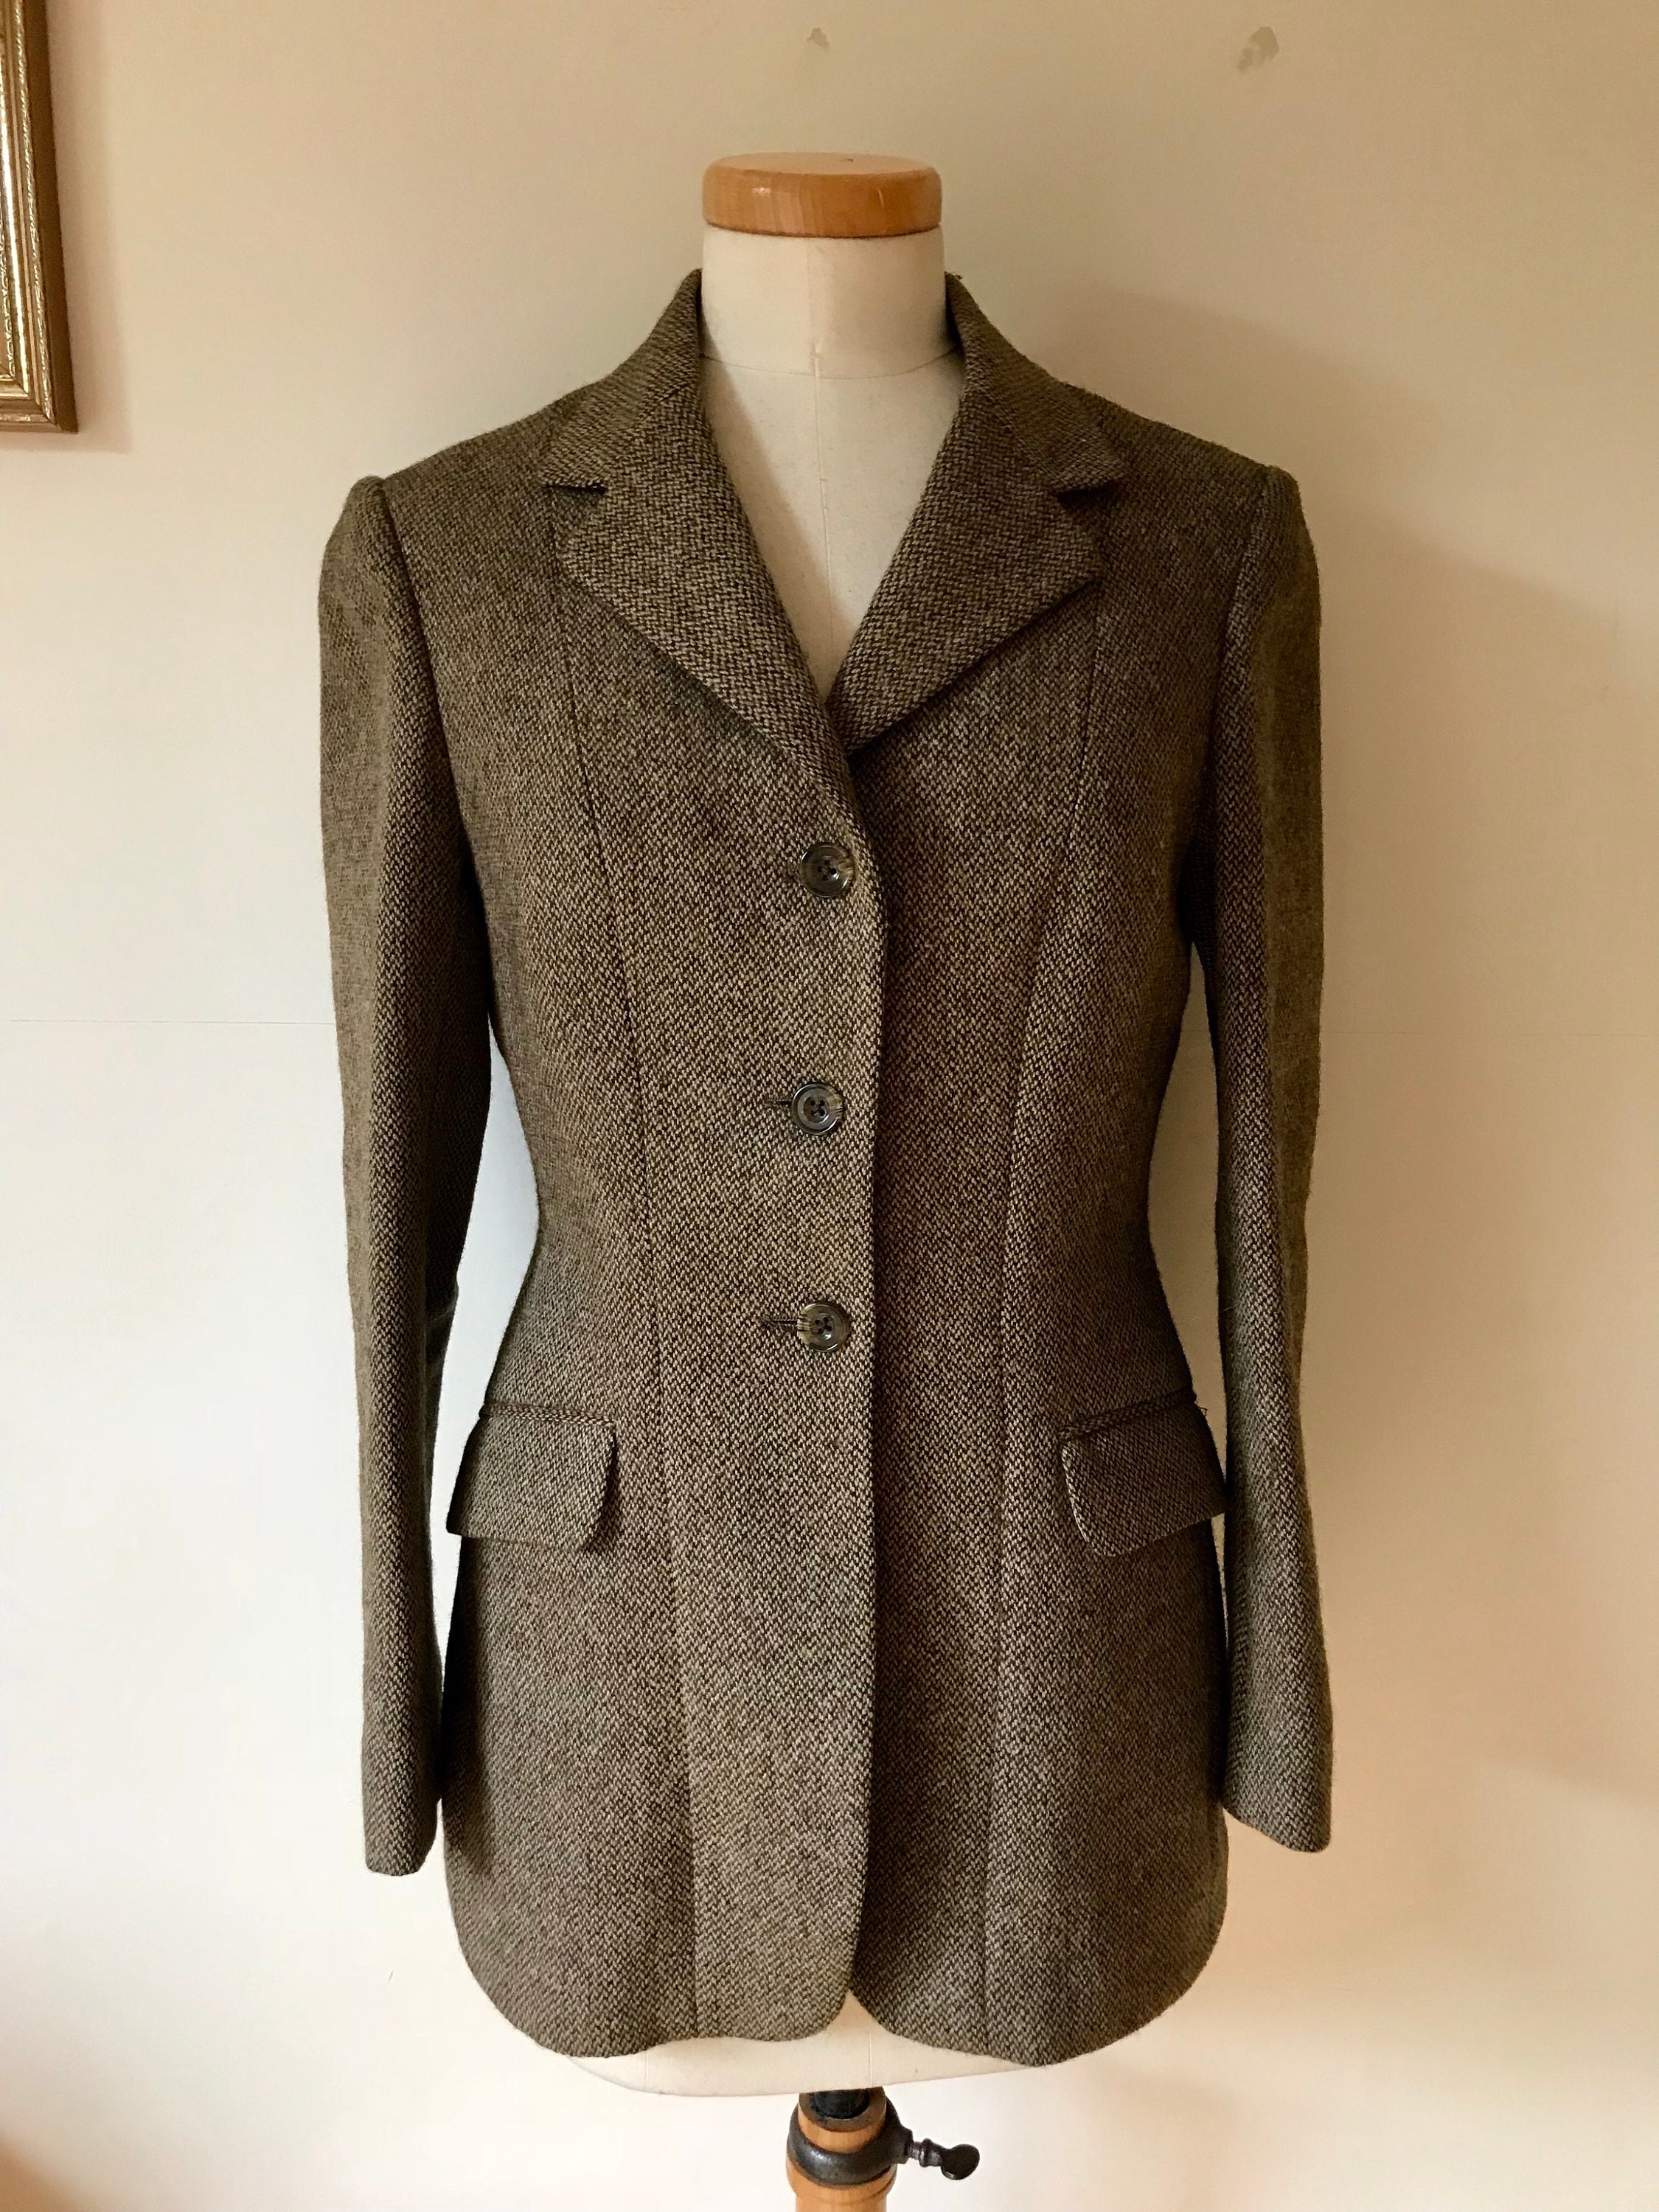 Vintage 1960s Jacket English Tweed 60s Pytchley Equestrian Ridding Coat ...